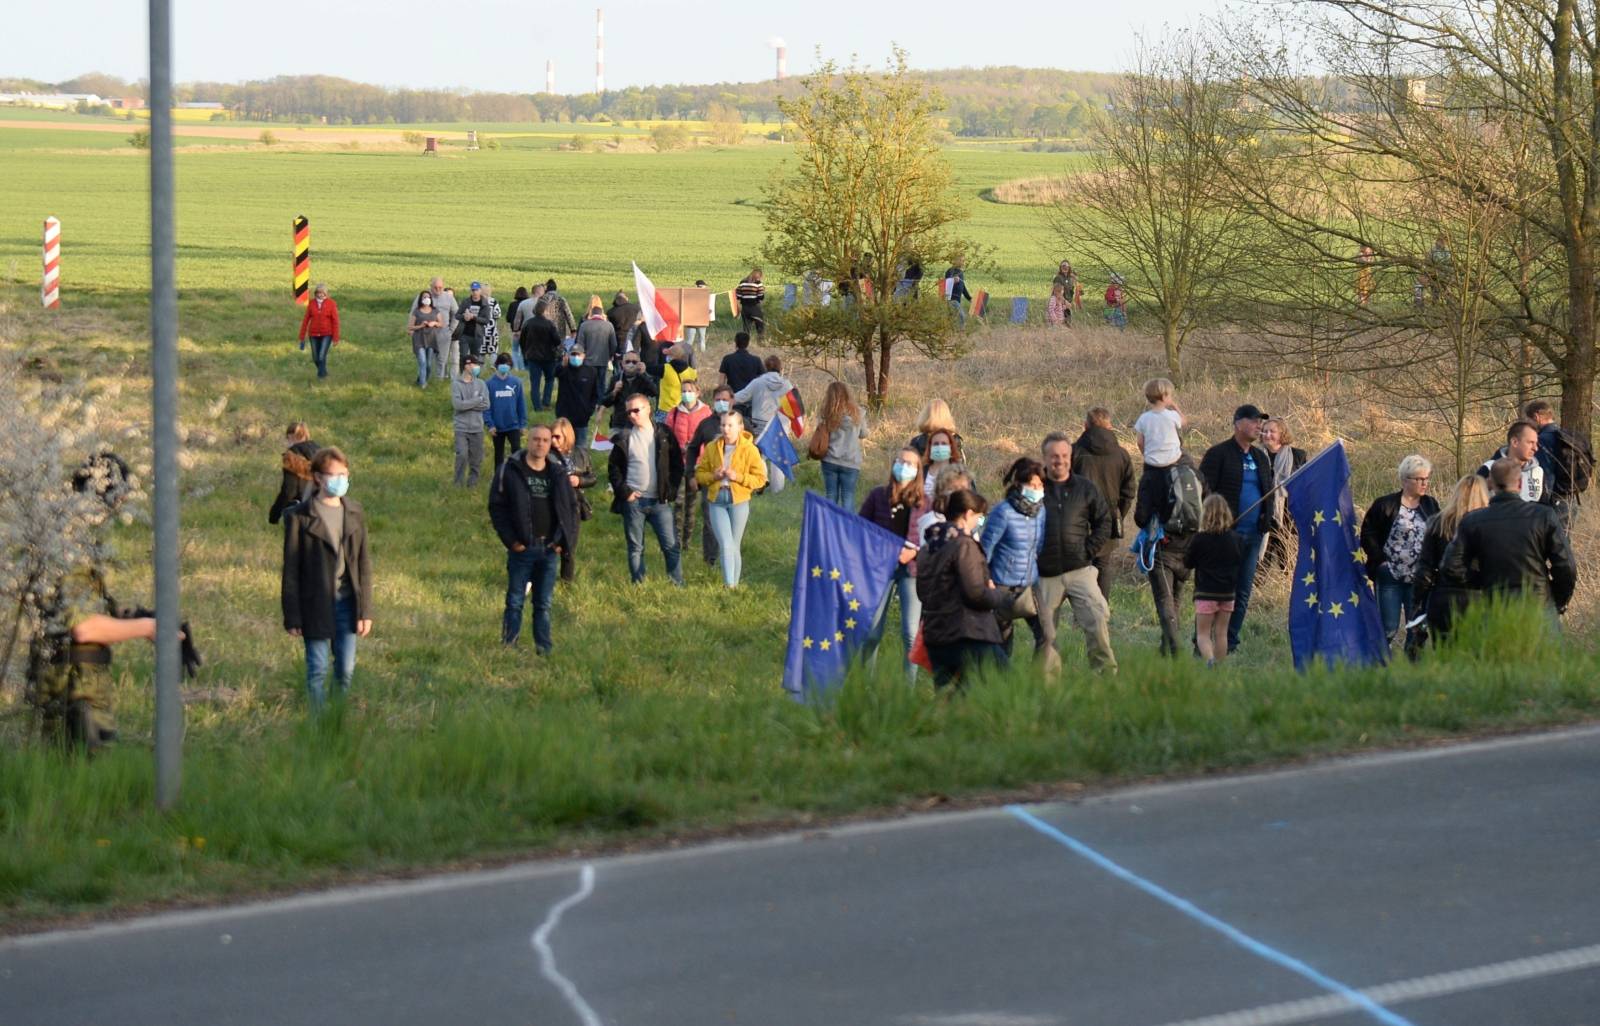 Cross-border workers stage protest at Polish-German border demanding to be exempt from the mandatory quarantine during coronavirus disease (COVID-19) outbreak at the crossing in Rosowek